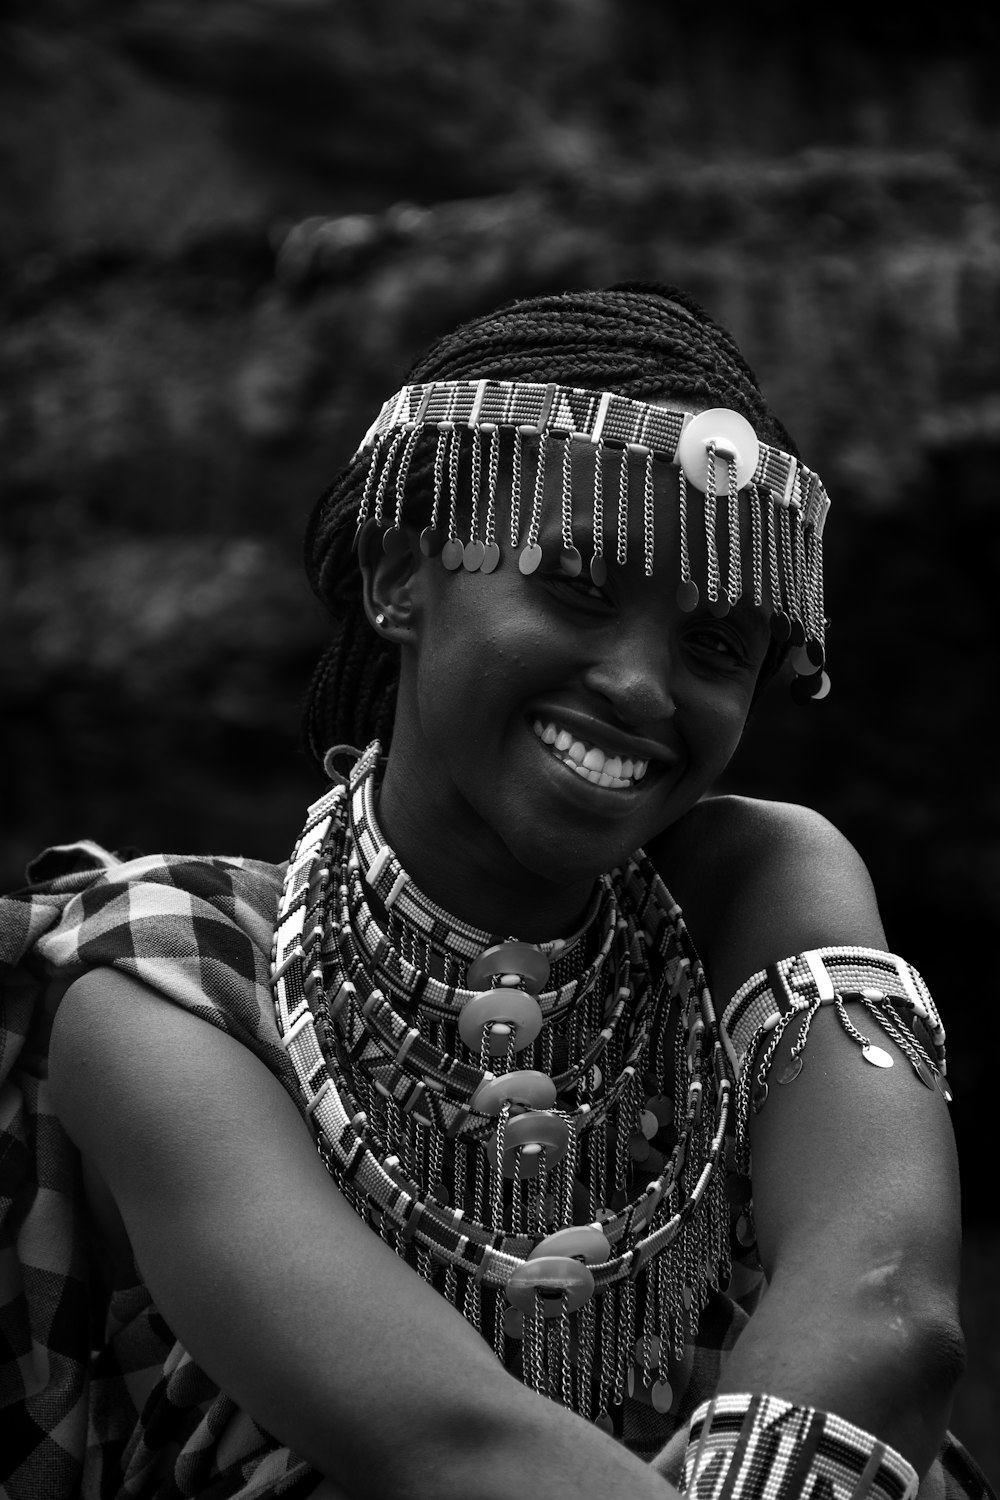 a woman wearing a headdress and smiling for the camera